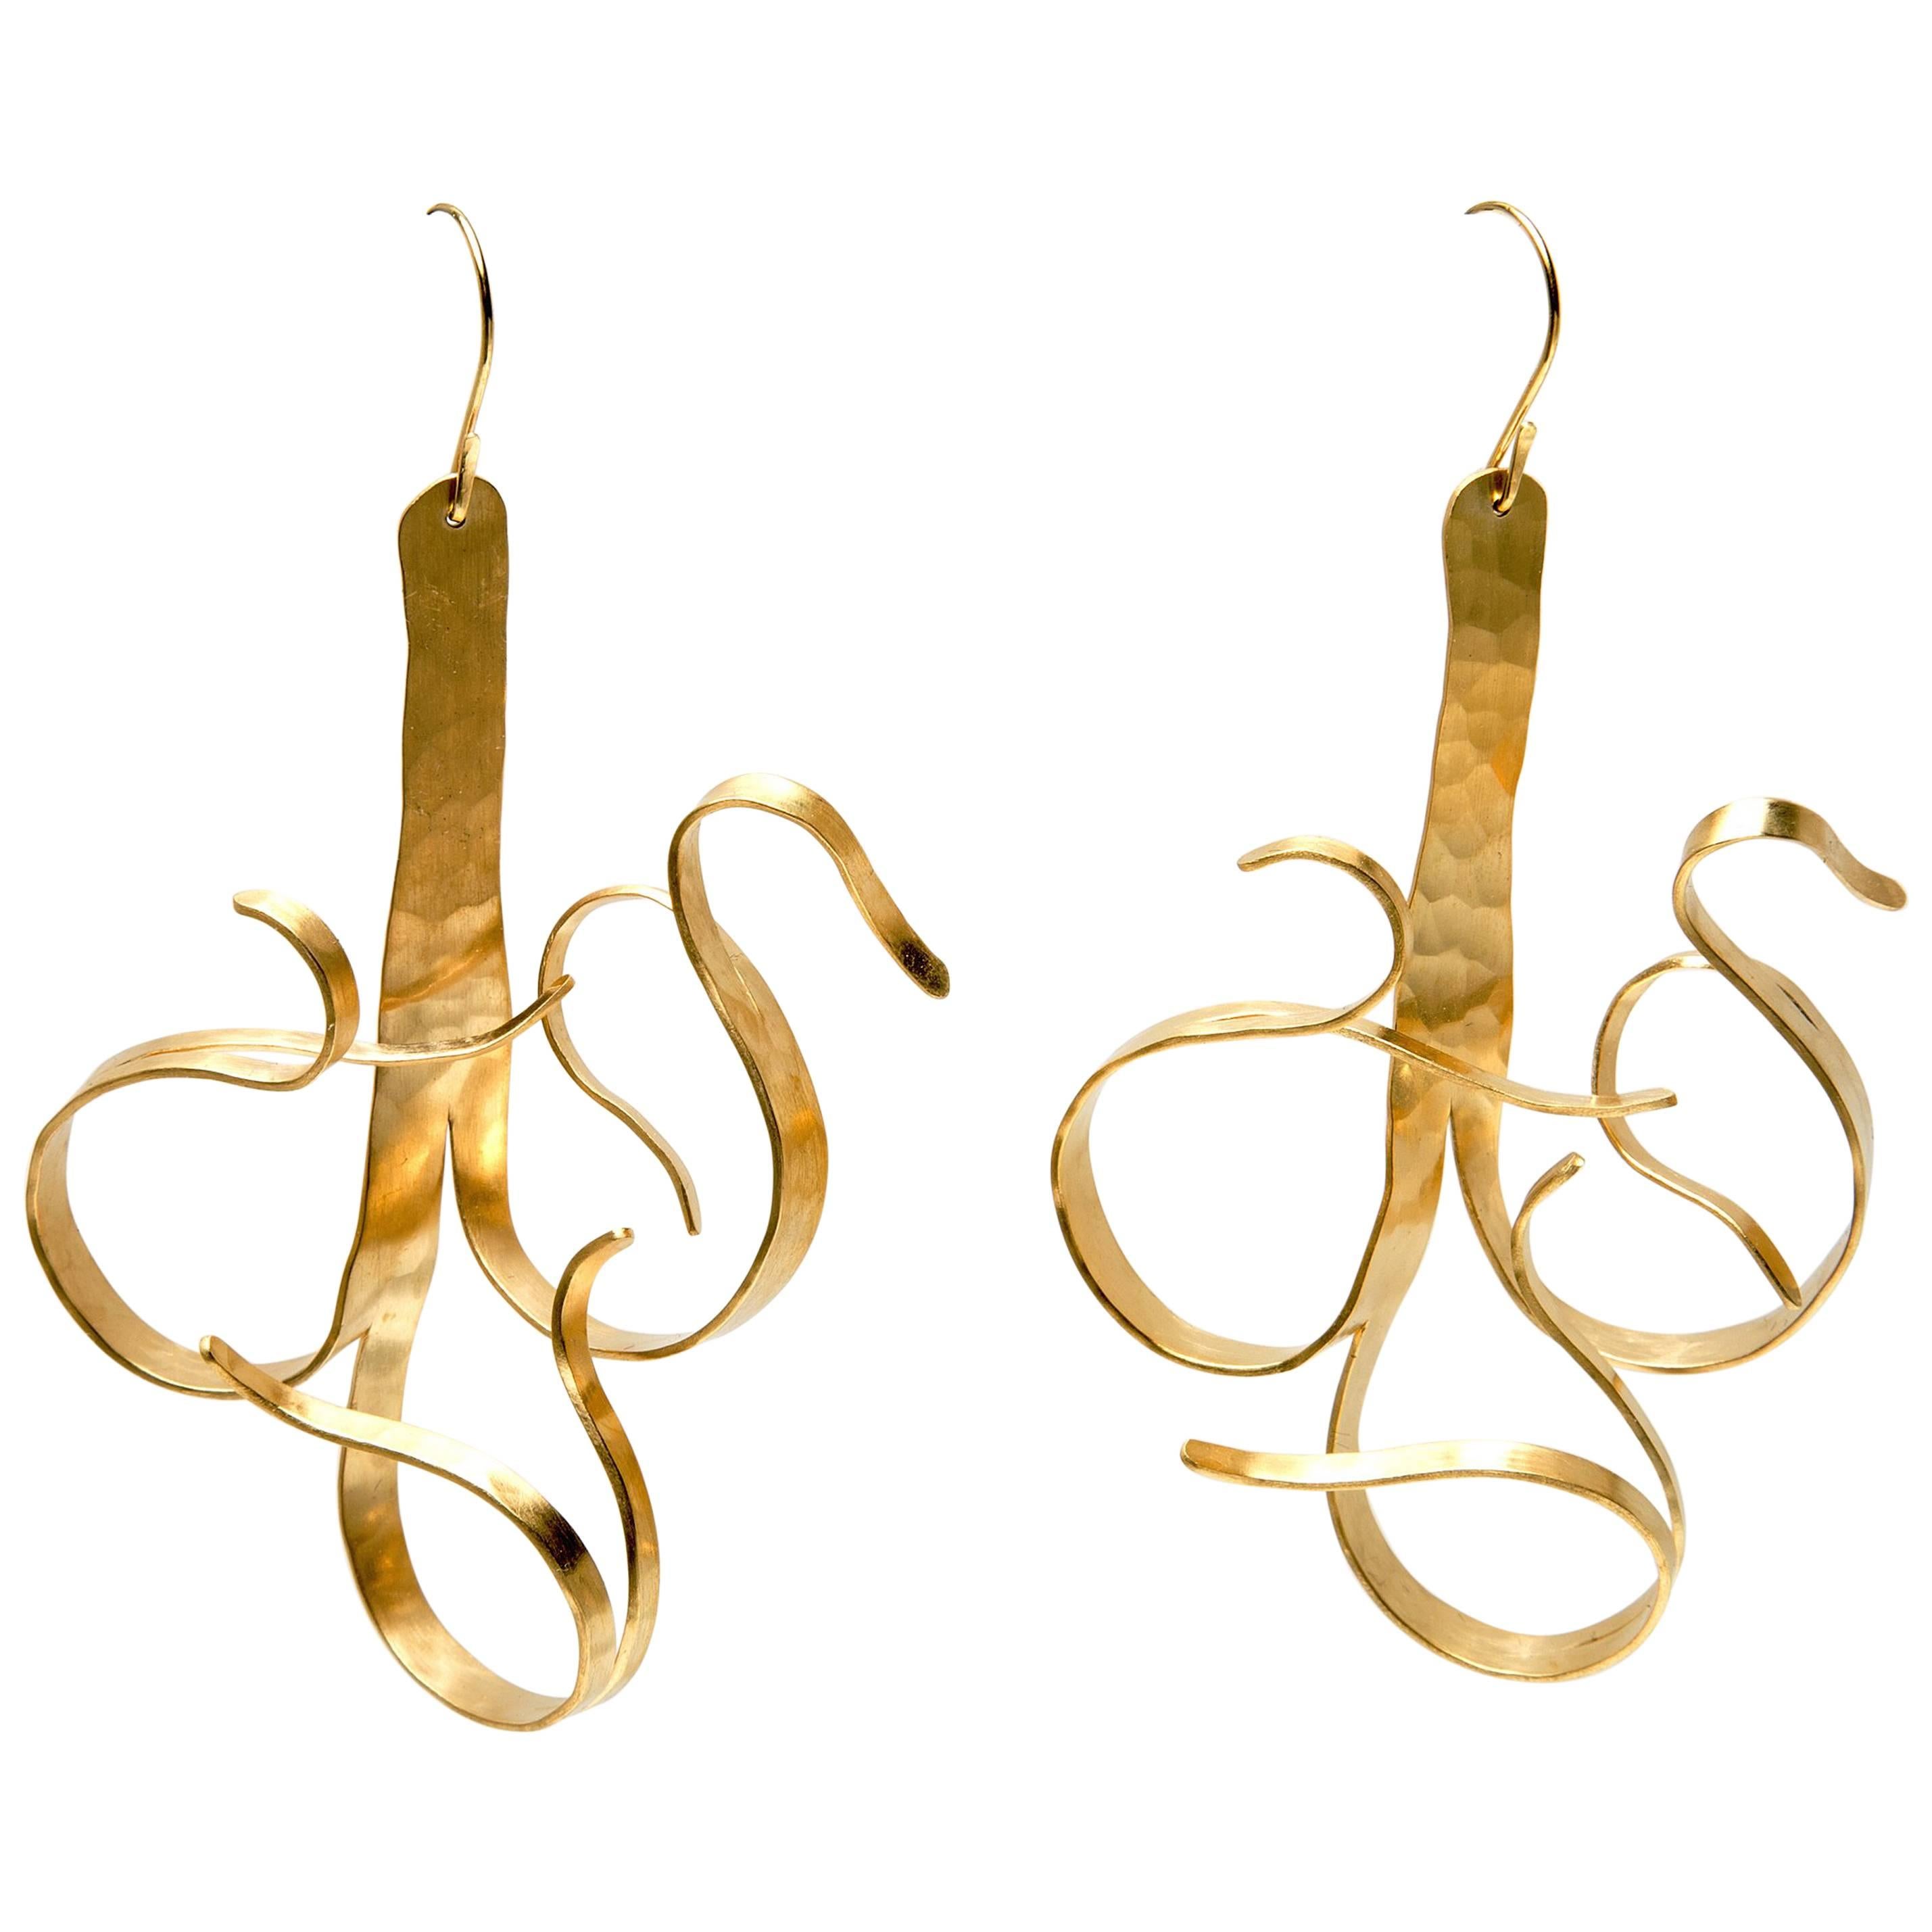 Earrings Gold-Plated by Jacques Jarrige "Fiori" For Sale